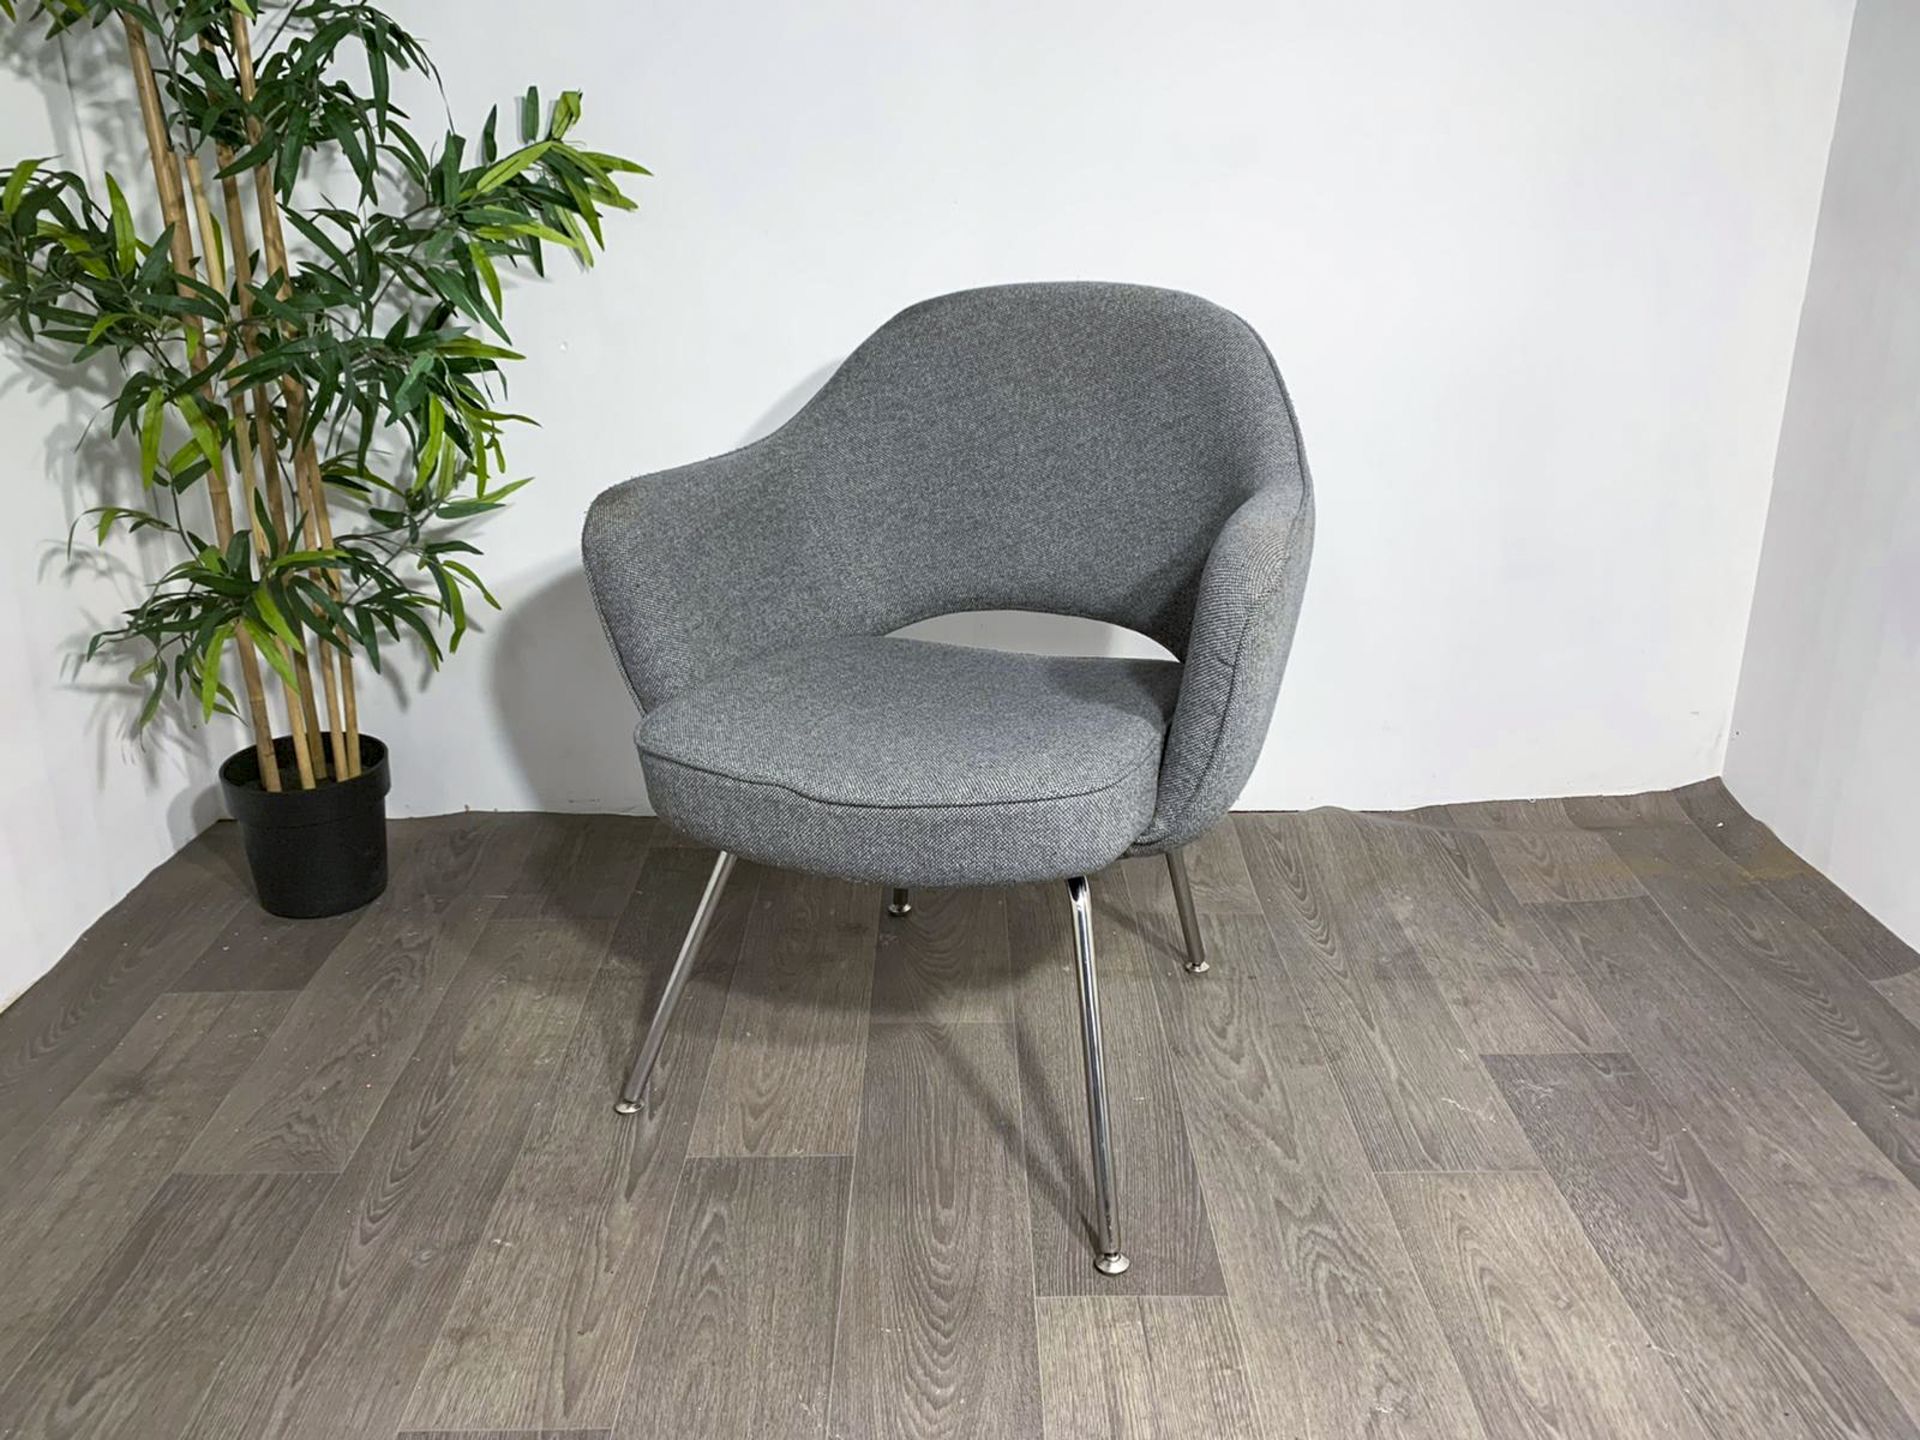 Grey Fabric Commercial Grade Chair with Chrome Legs x2 - Image 5 of 9